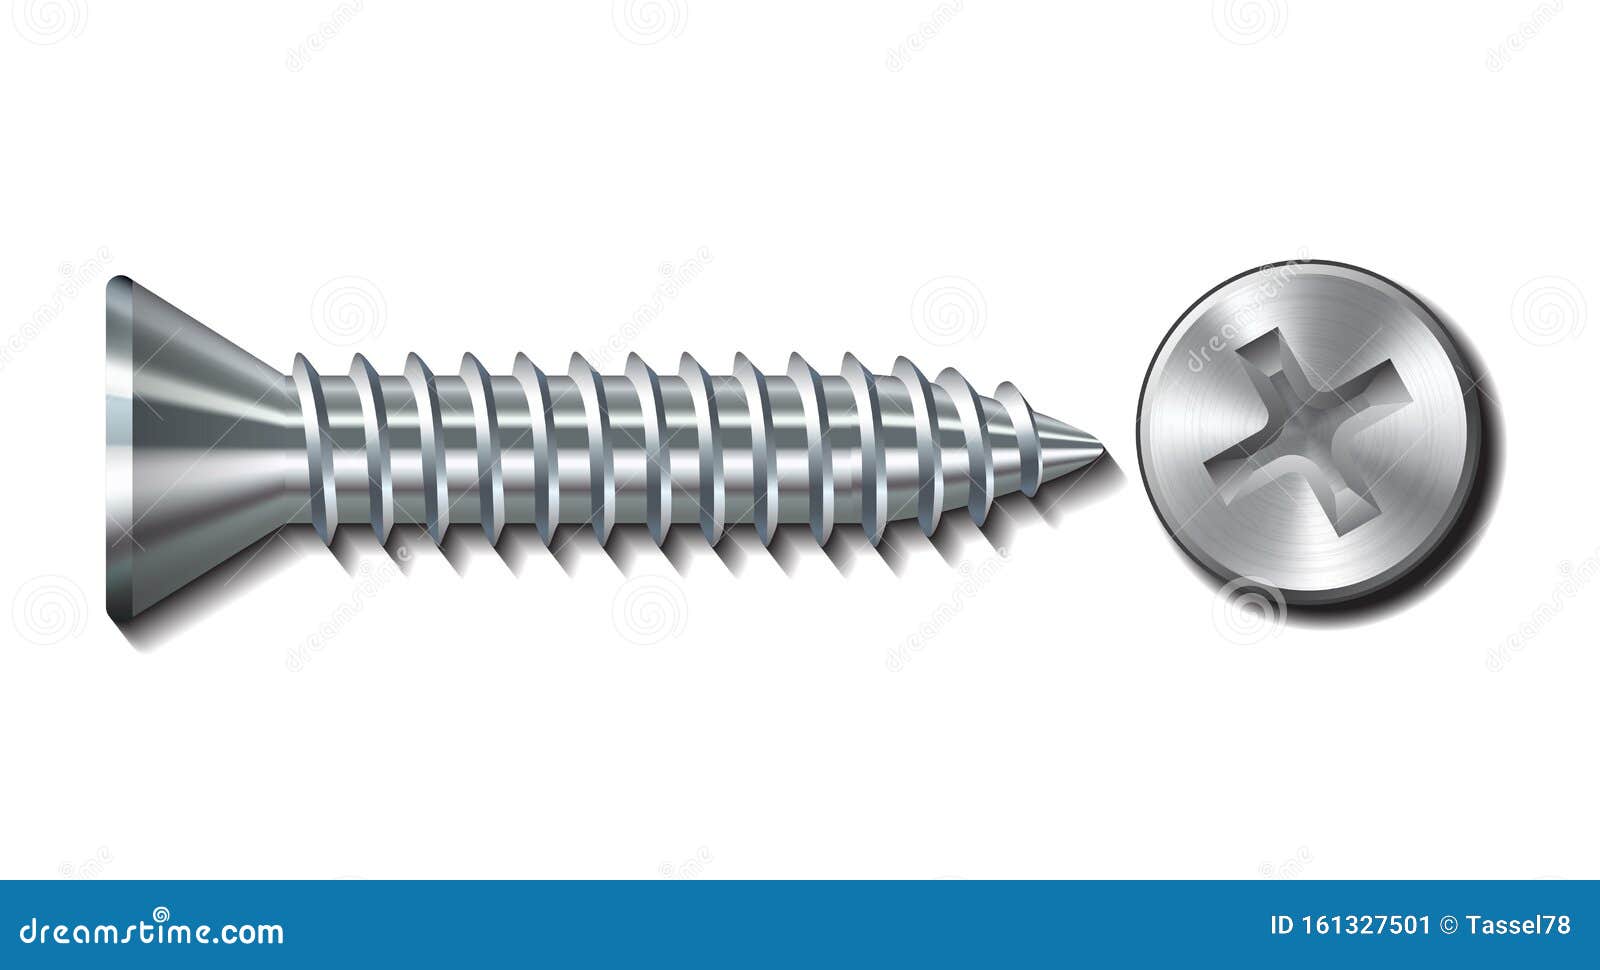 bolt screw metal pin with head slot and side view